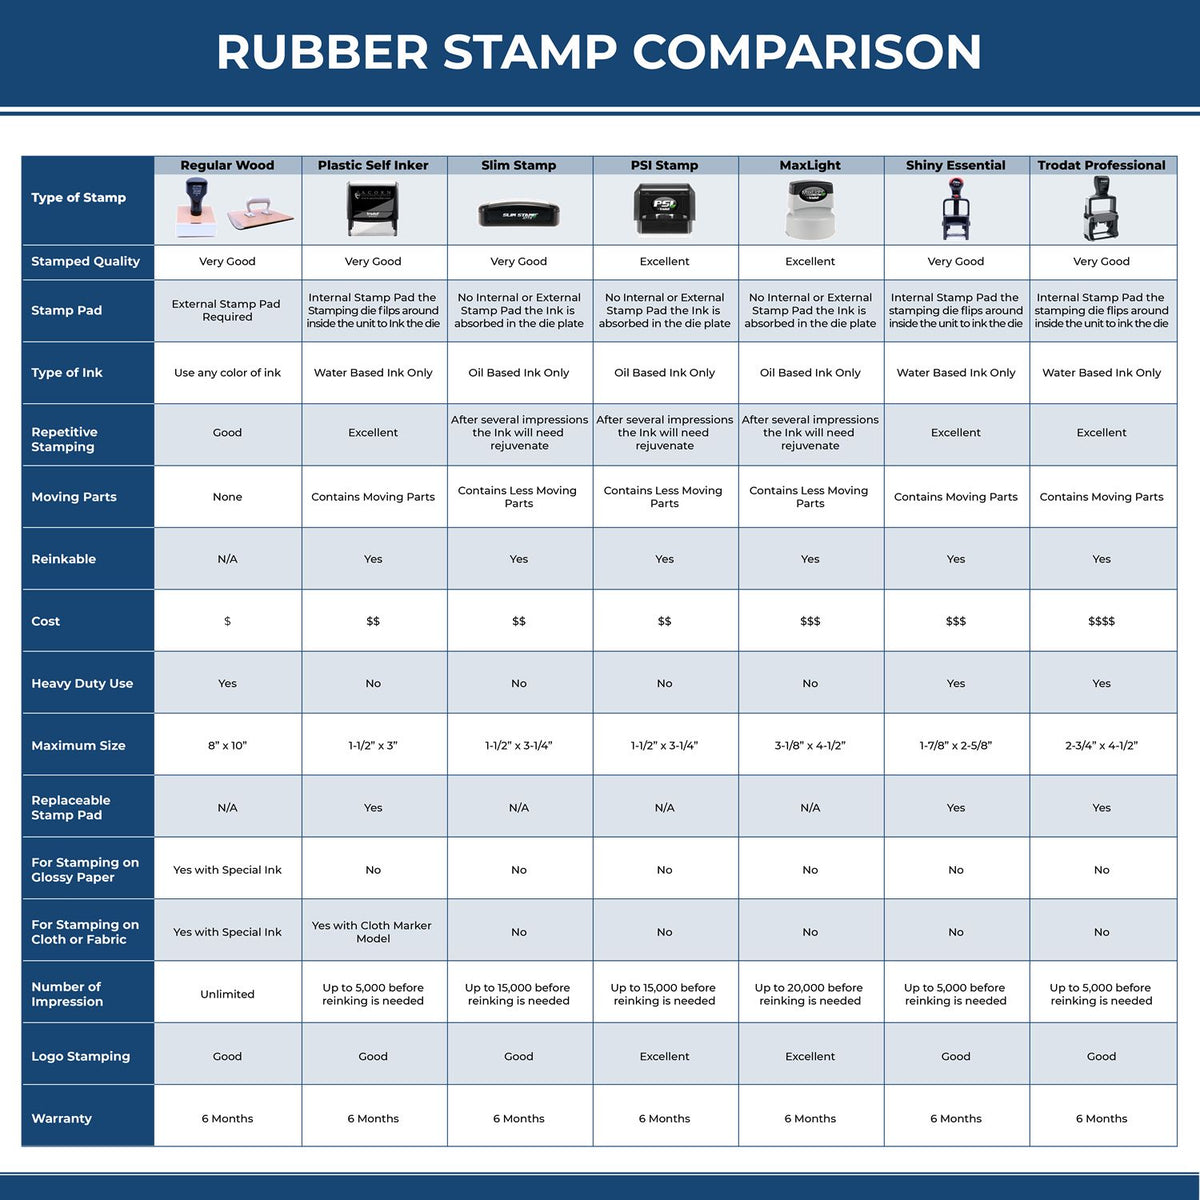 A comparison chart for the different types of mount models available for the MaxLight Premium Pre-Inked Alaska State Seal Notarial Stamp.